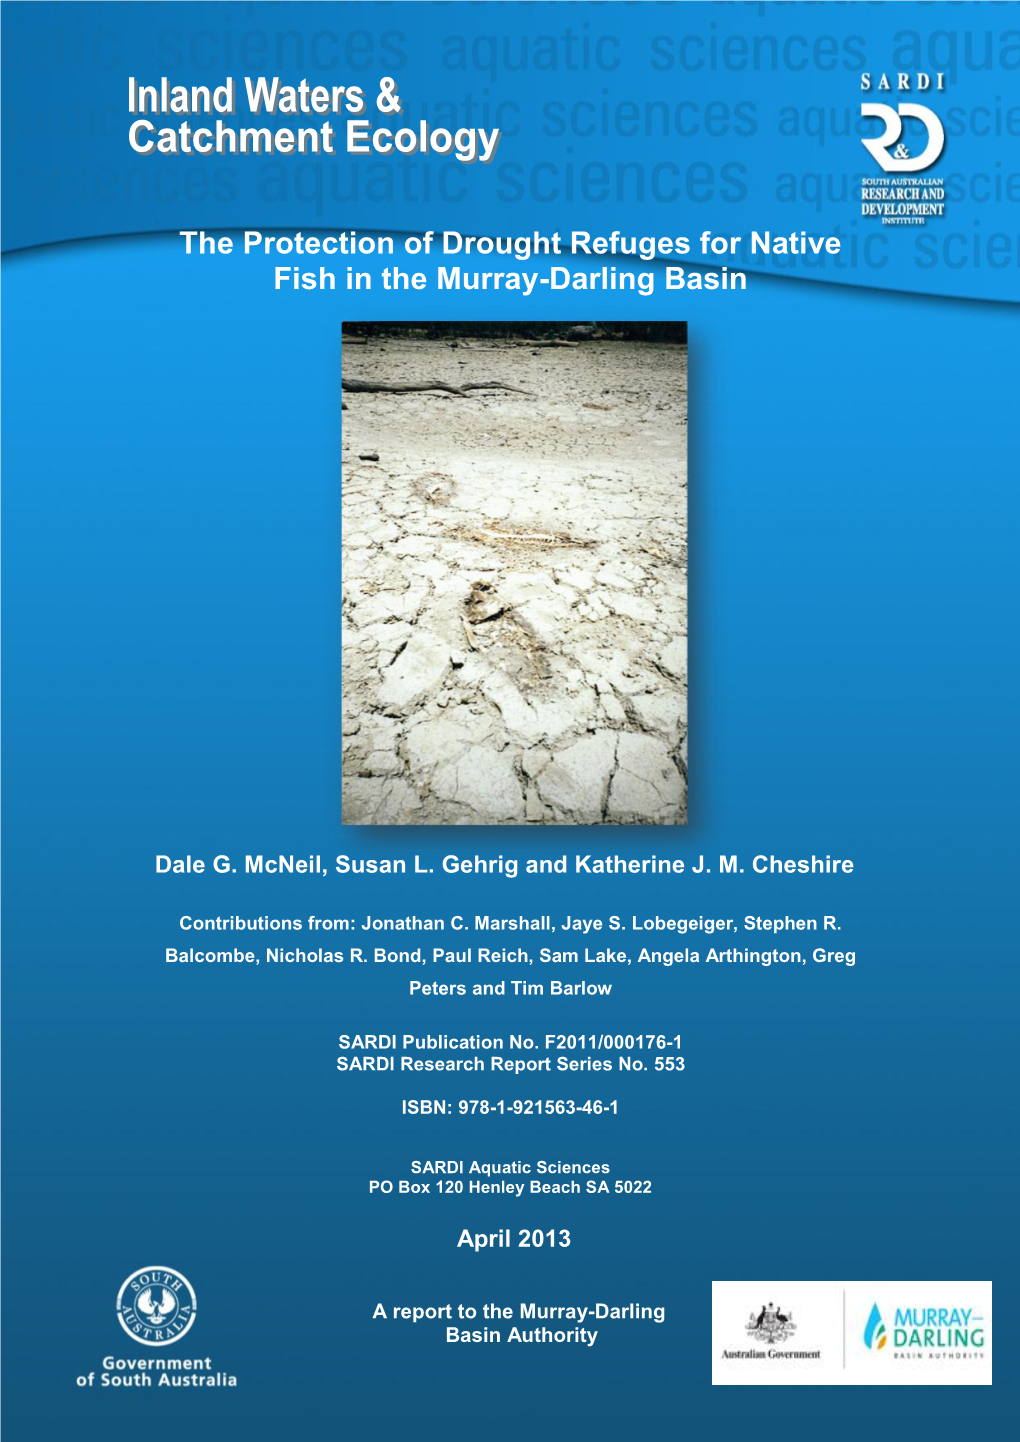 The Protection of Drought Refuges for Native Fish in the Murray-Darling Basin